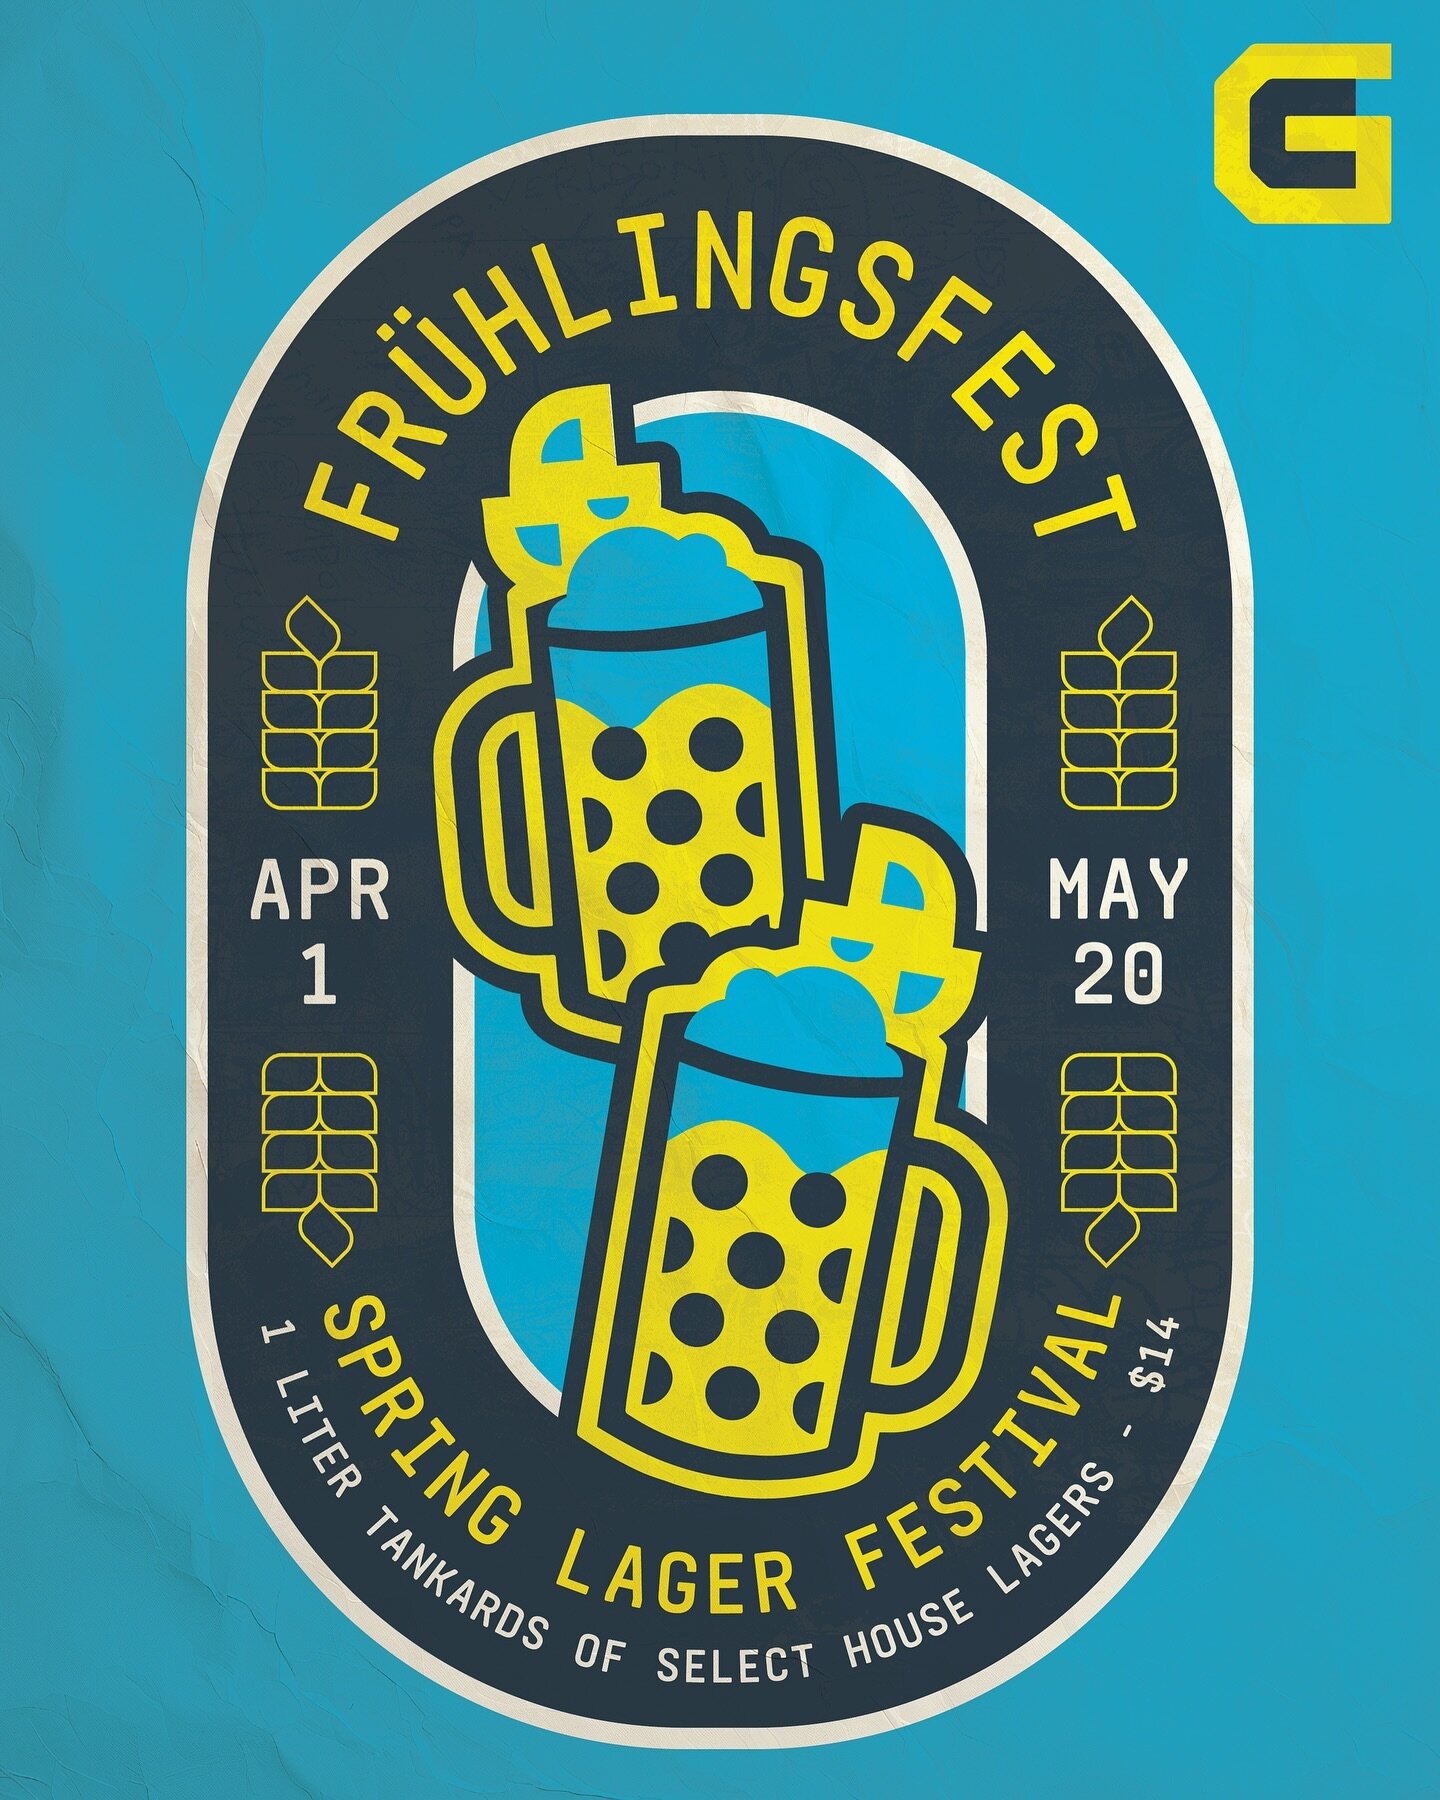 🌸🍻 Dive into the spirit of spring at the Fr&uuml;hlingsfest: Spring Lager Festival! 🍻🌸 

From April 1 to May 20, join us at GameCraft Brewing for a celebration of crispi brews. Indulge in Liters of select Lagers for just $14! 🍺 

Don&rsquo;t mis